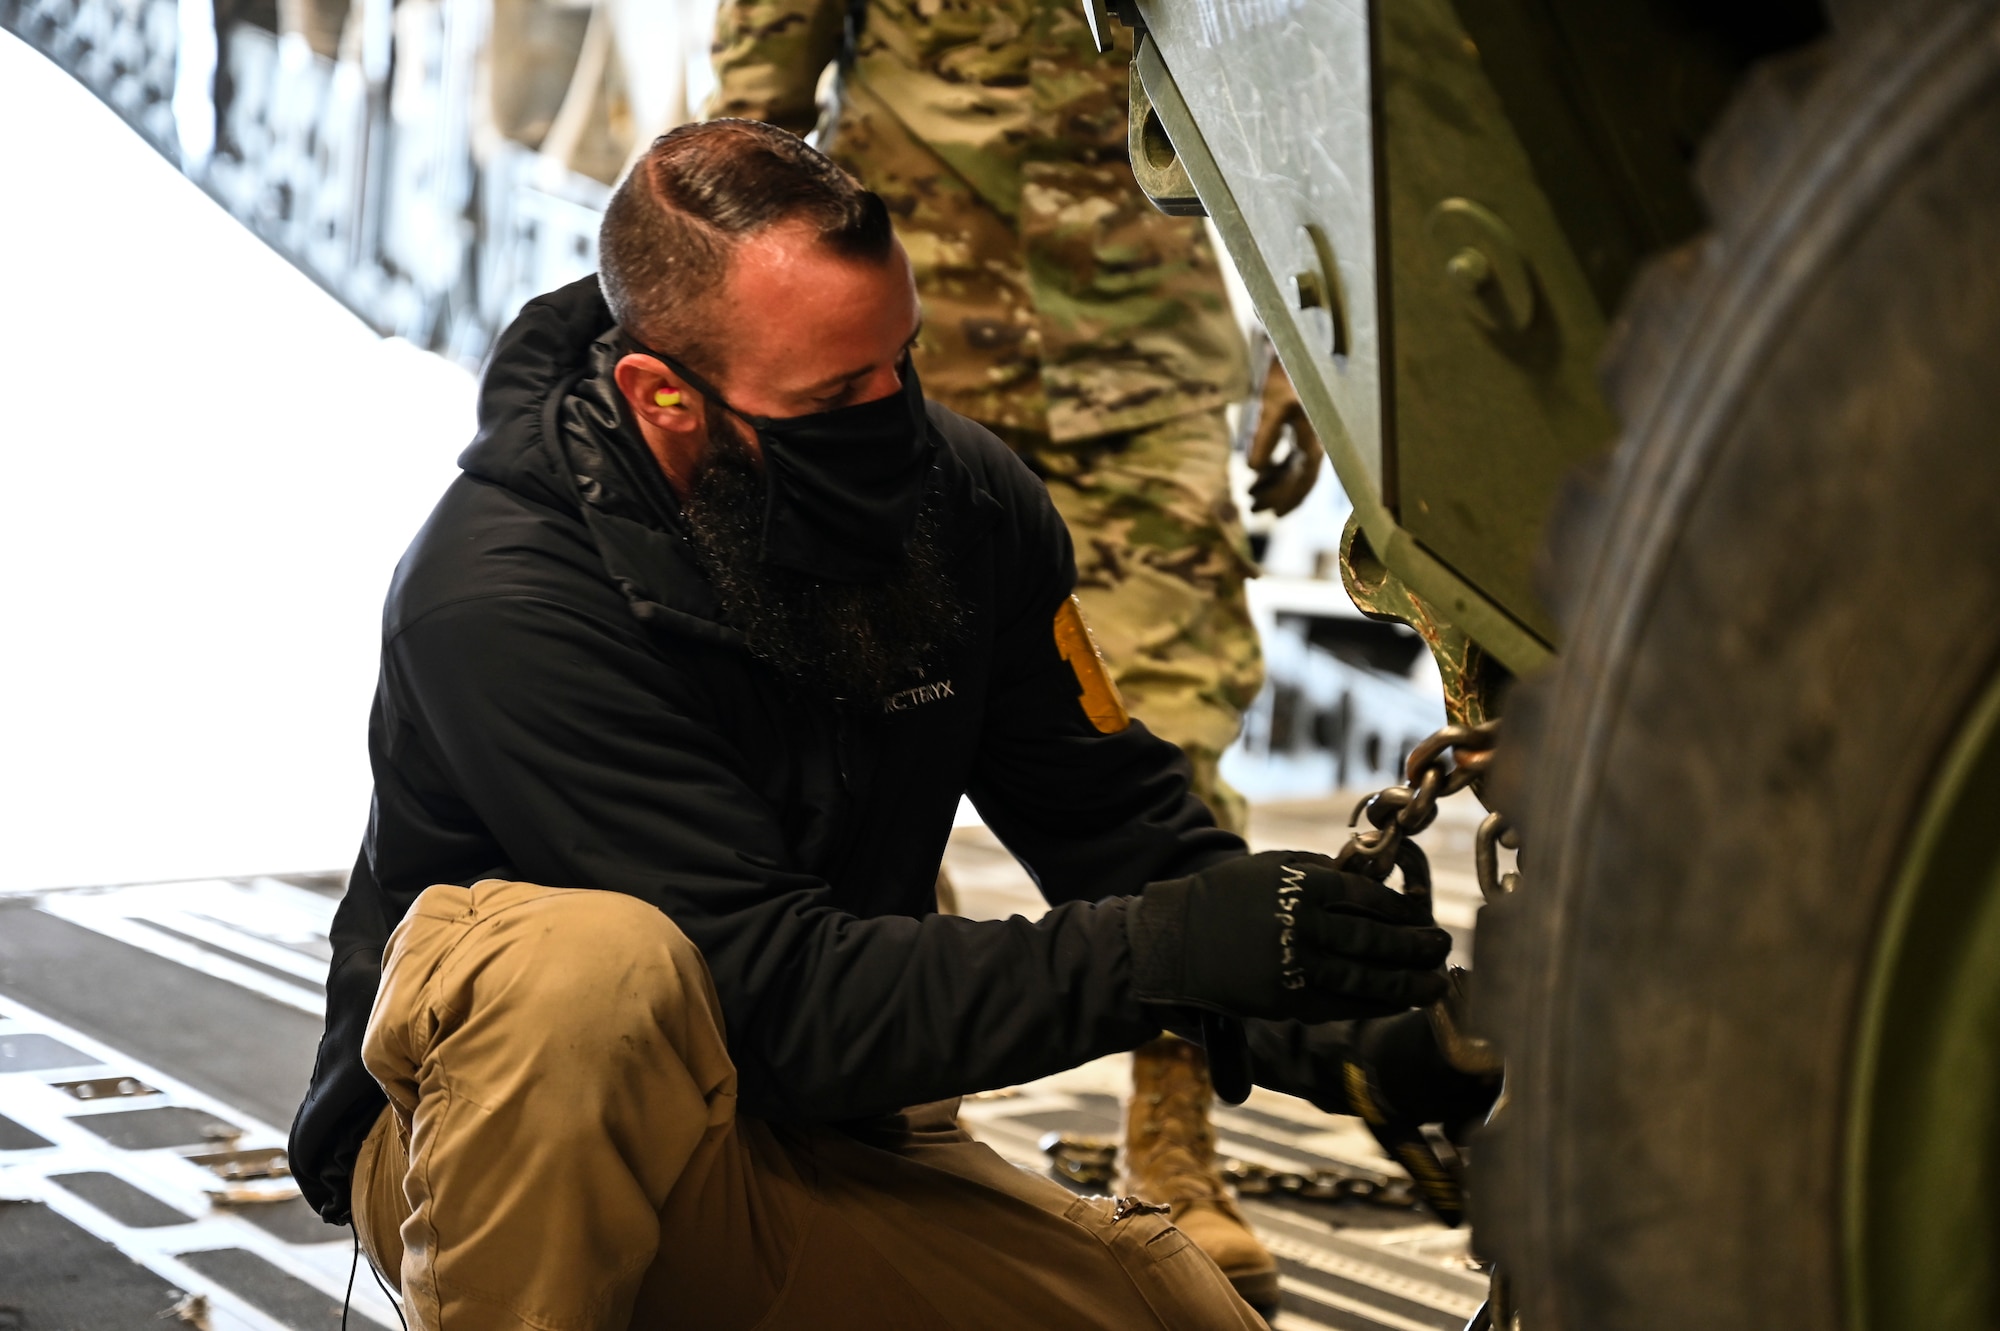 Michael Speaks, aircraft loader leader with the 62nd Aerial Port Squadron, secures a U.S. Army Stryker Infantry Carrier Vehicle aboard a C-17 Globemaster III as part of Exercise Rainier War at Joint Base Lewis-McChord, Washington, April 28, 2021. Rainier War tests the 62nd Airlift Wing's capability to plan, generate and execute a deployment tasking, sustain contingency operations, demonstrate full spectrum readiness while executing agile combat employment in a contested, degraded and operationally limited environment. (U.S. Air Force photo by Master Sgt. Julius Delos Reyes)